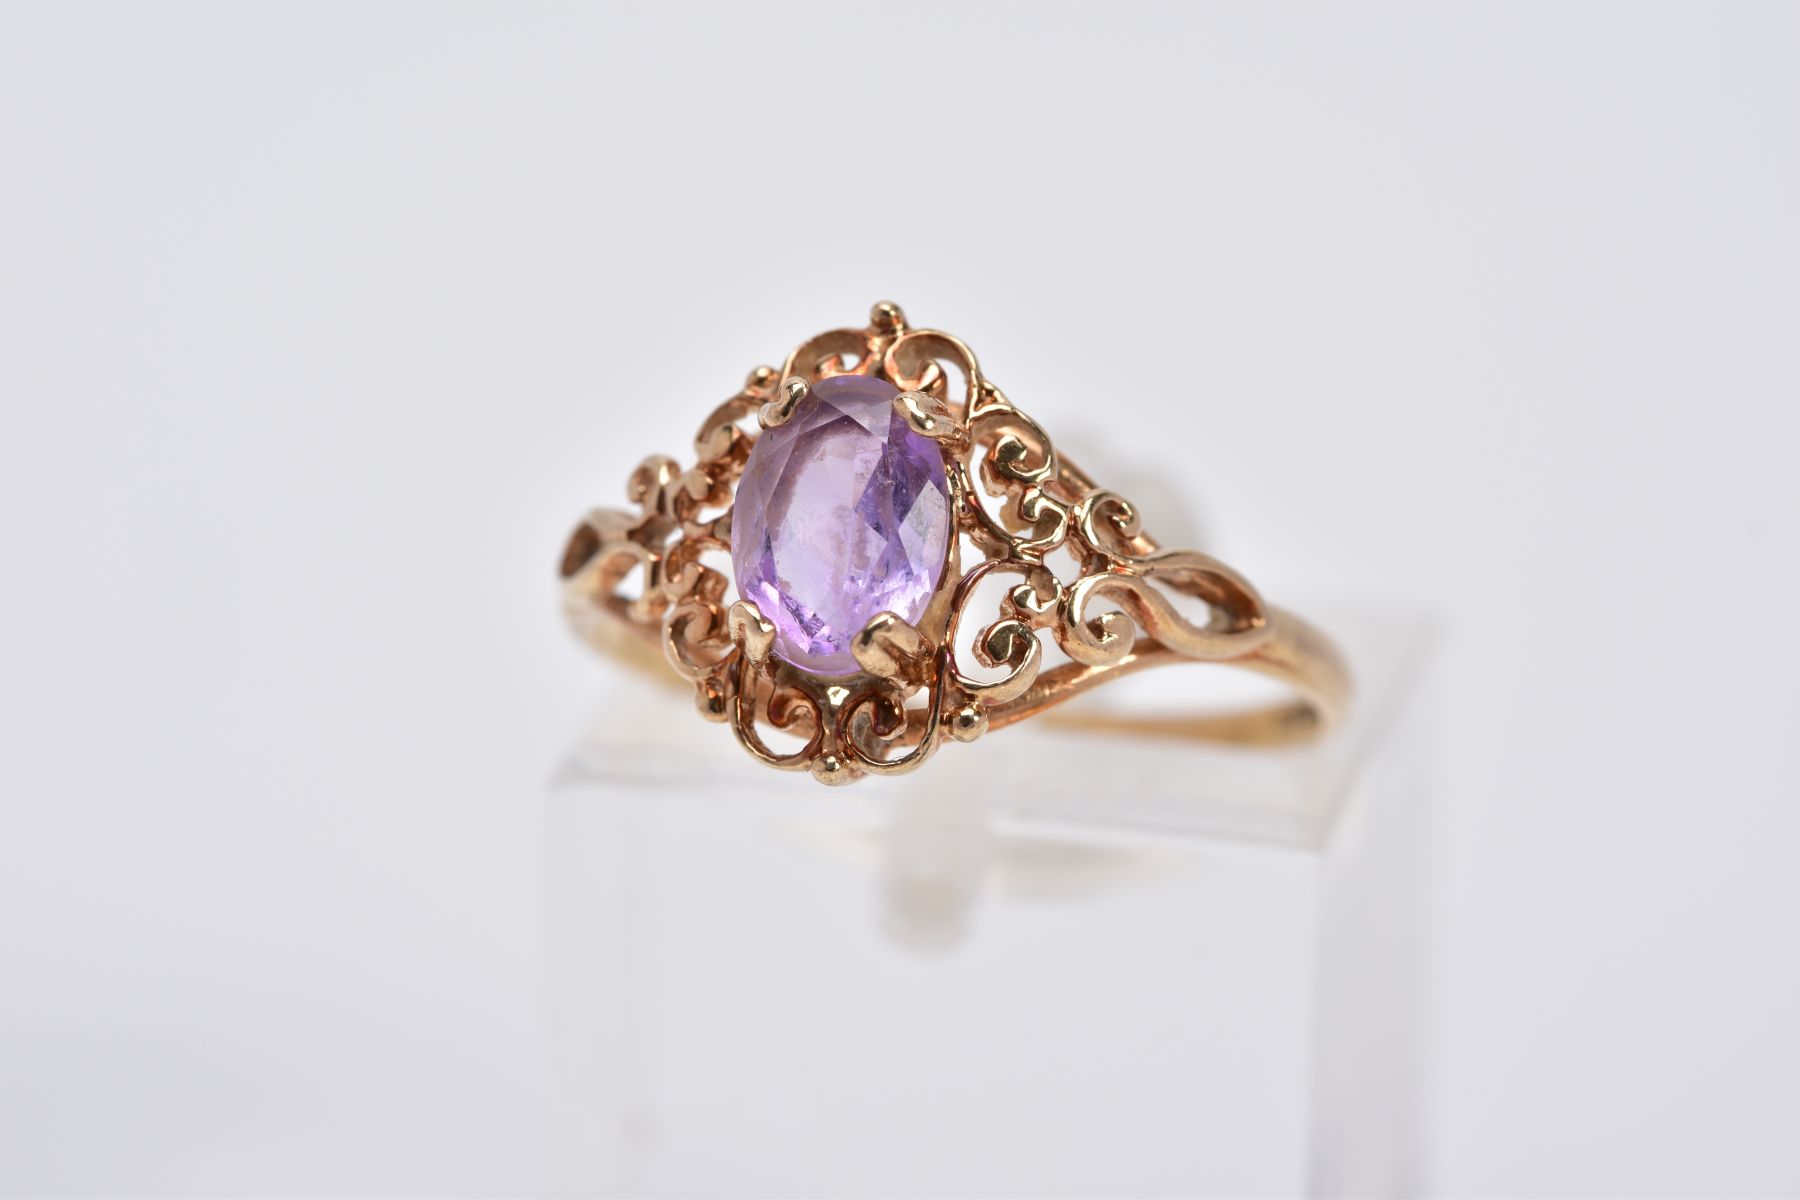 A 9CT GOLD AMETHYST RING, designed with a claw set, oval cut amethyst, within an openwork scroll